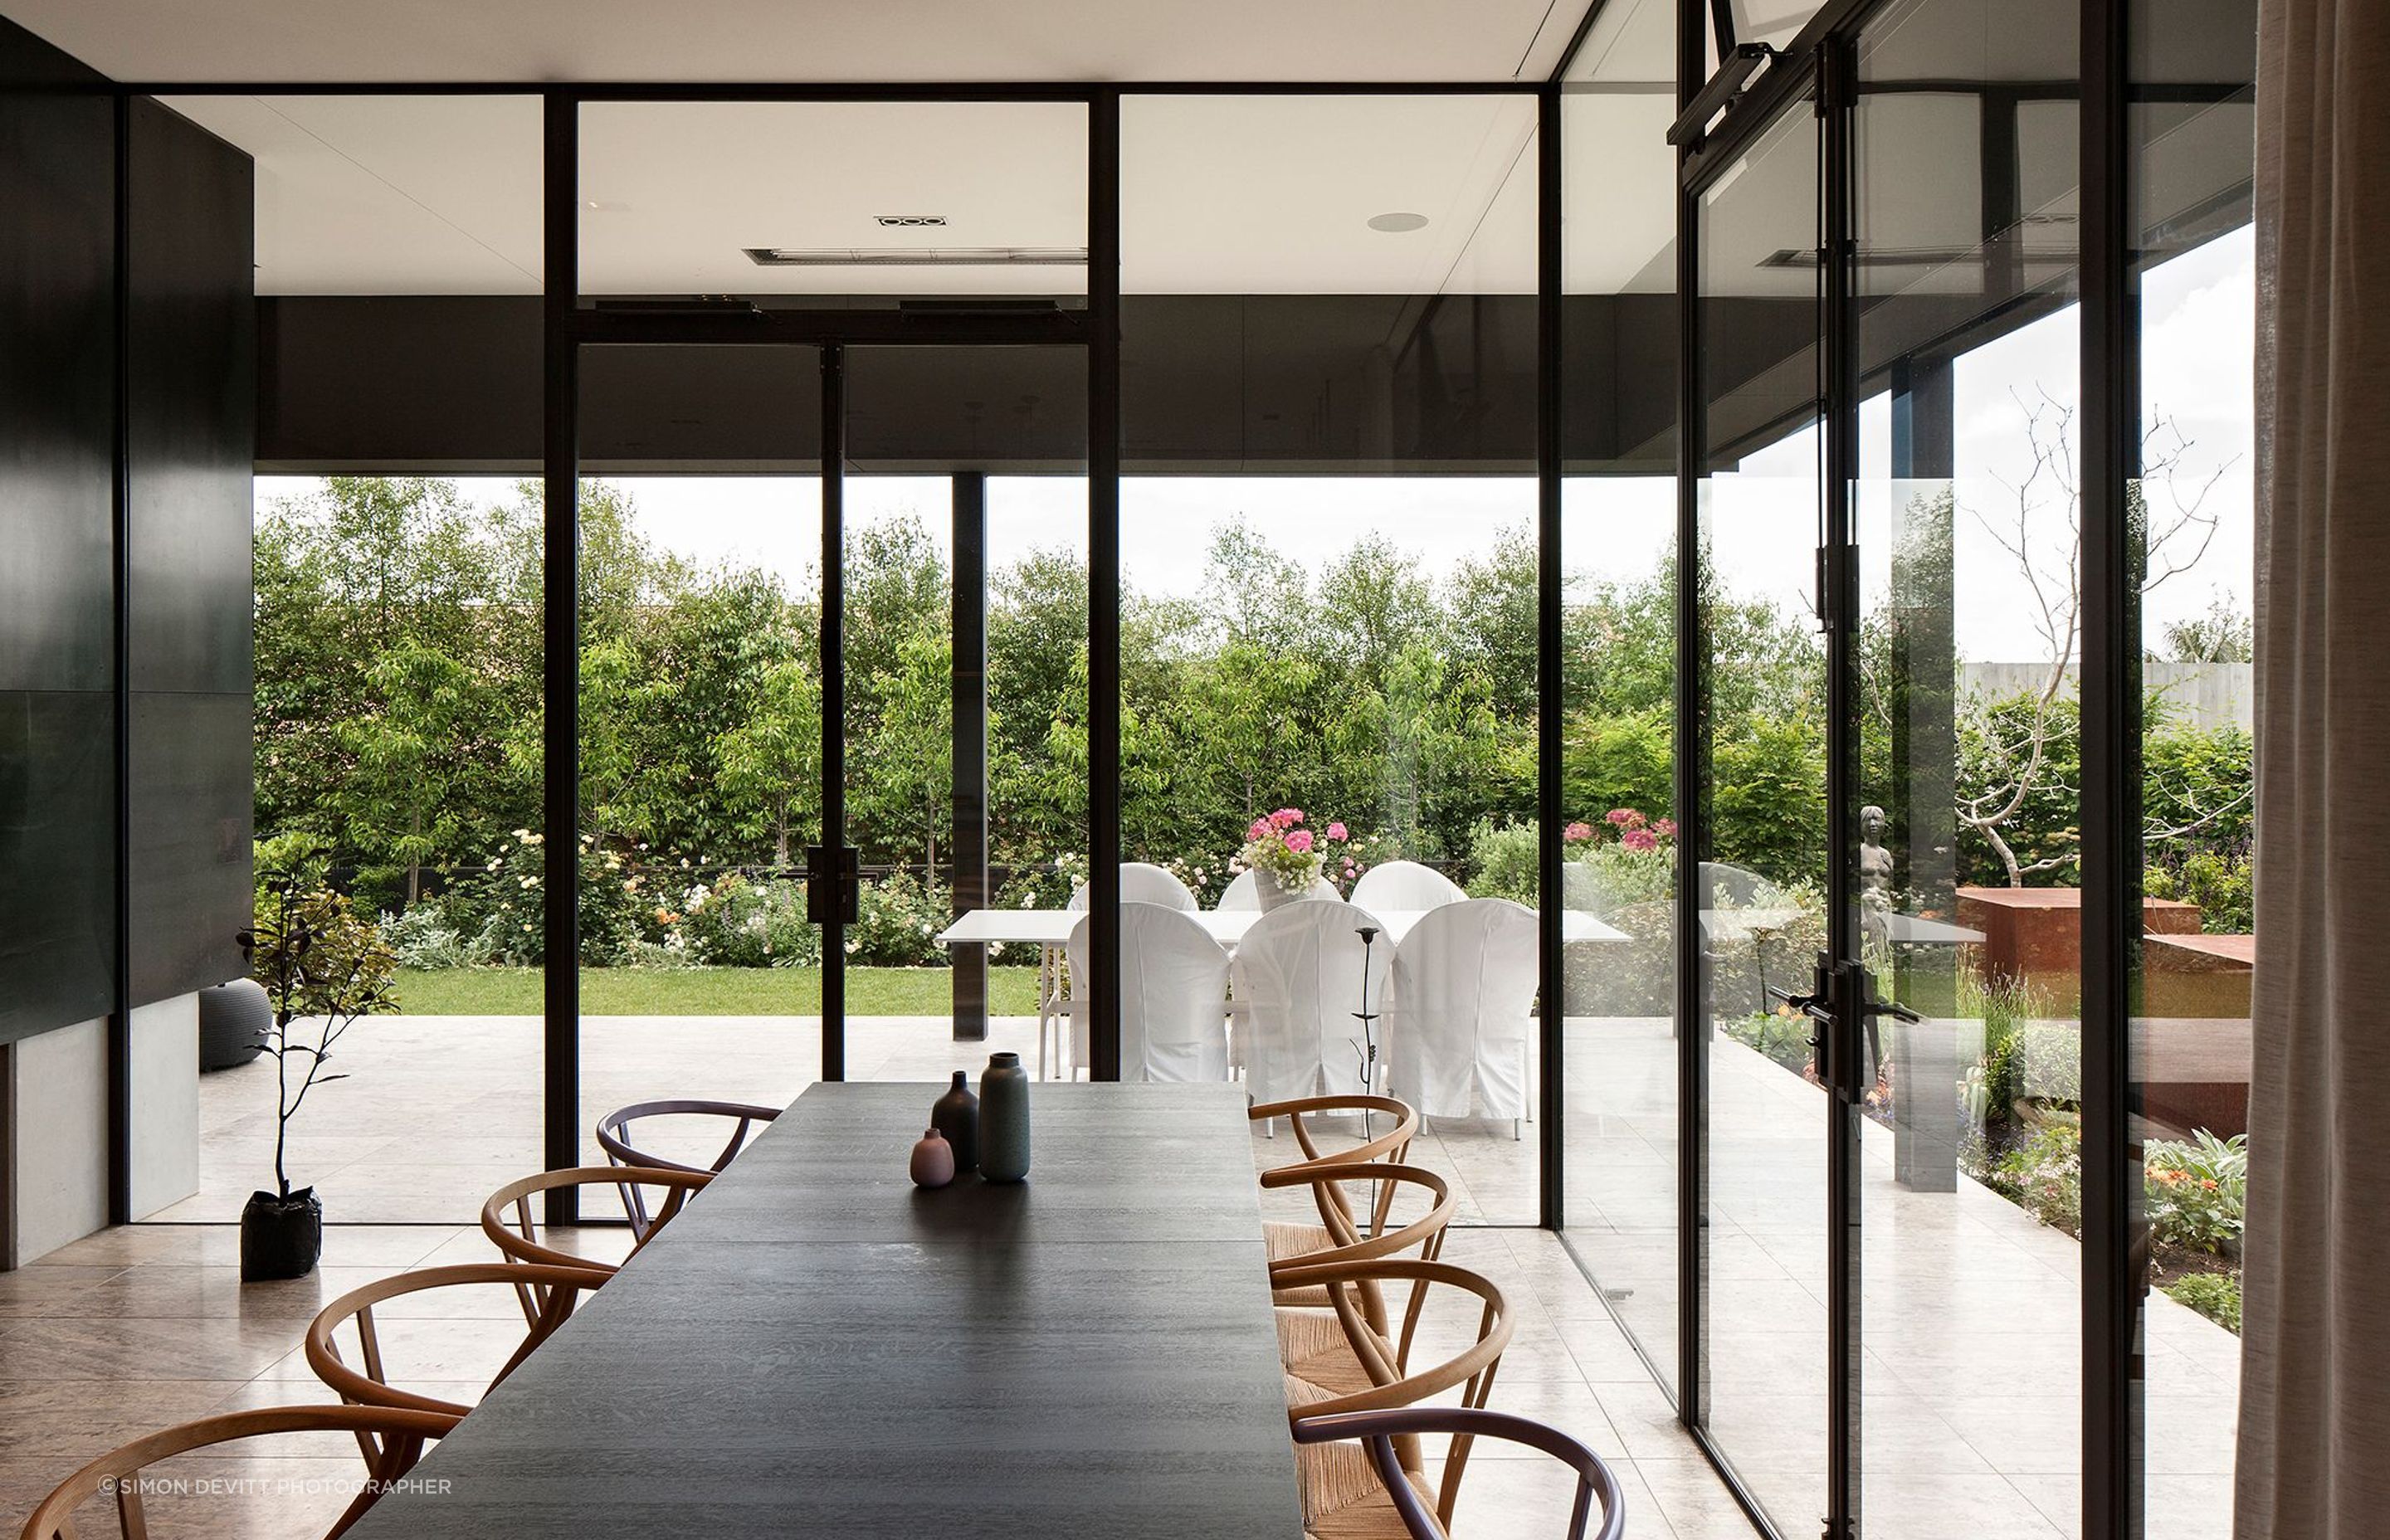 Patterson Associates' Country House in the City, Auckland, is 'a pavilion in a garden' designed for food and family, with a virtually seamless flow from the indoor to outdoor dining areas, a farmhouse kitchen and garden. Photograph by Simon Devitt.